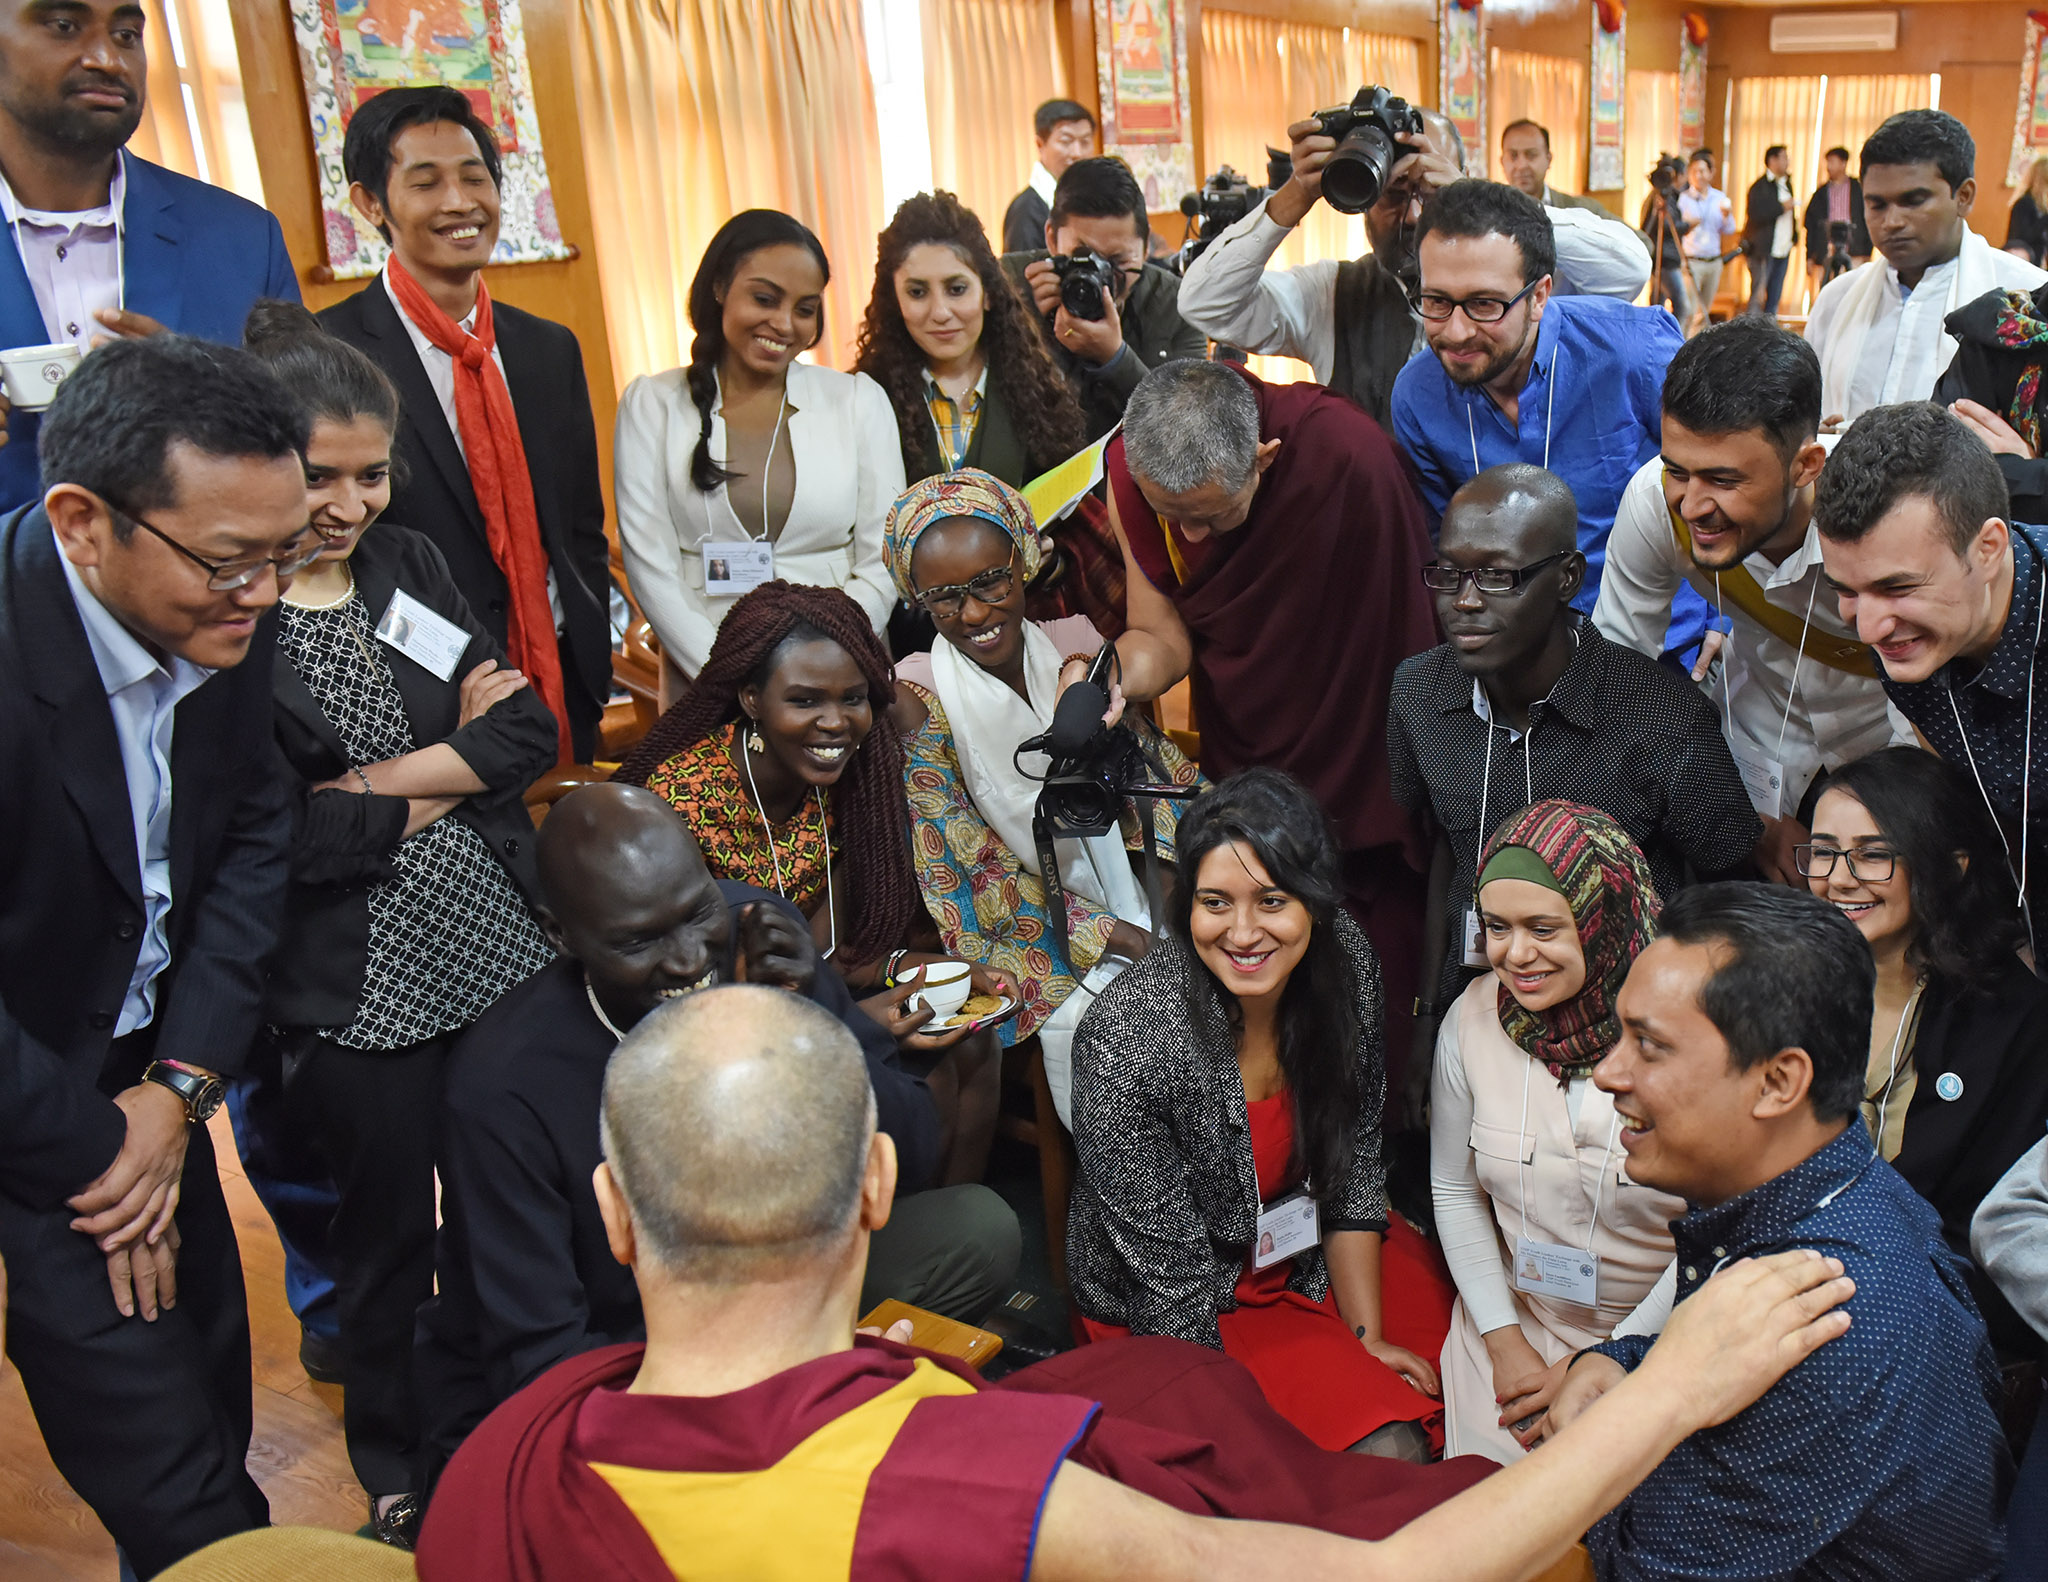 Gatkuoth (center-right in black shirt) says his mentorship by the Dalai Lama and help from USIP have strengthened his work.